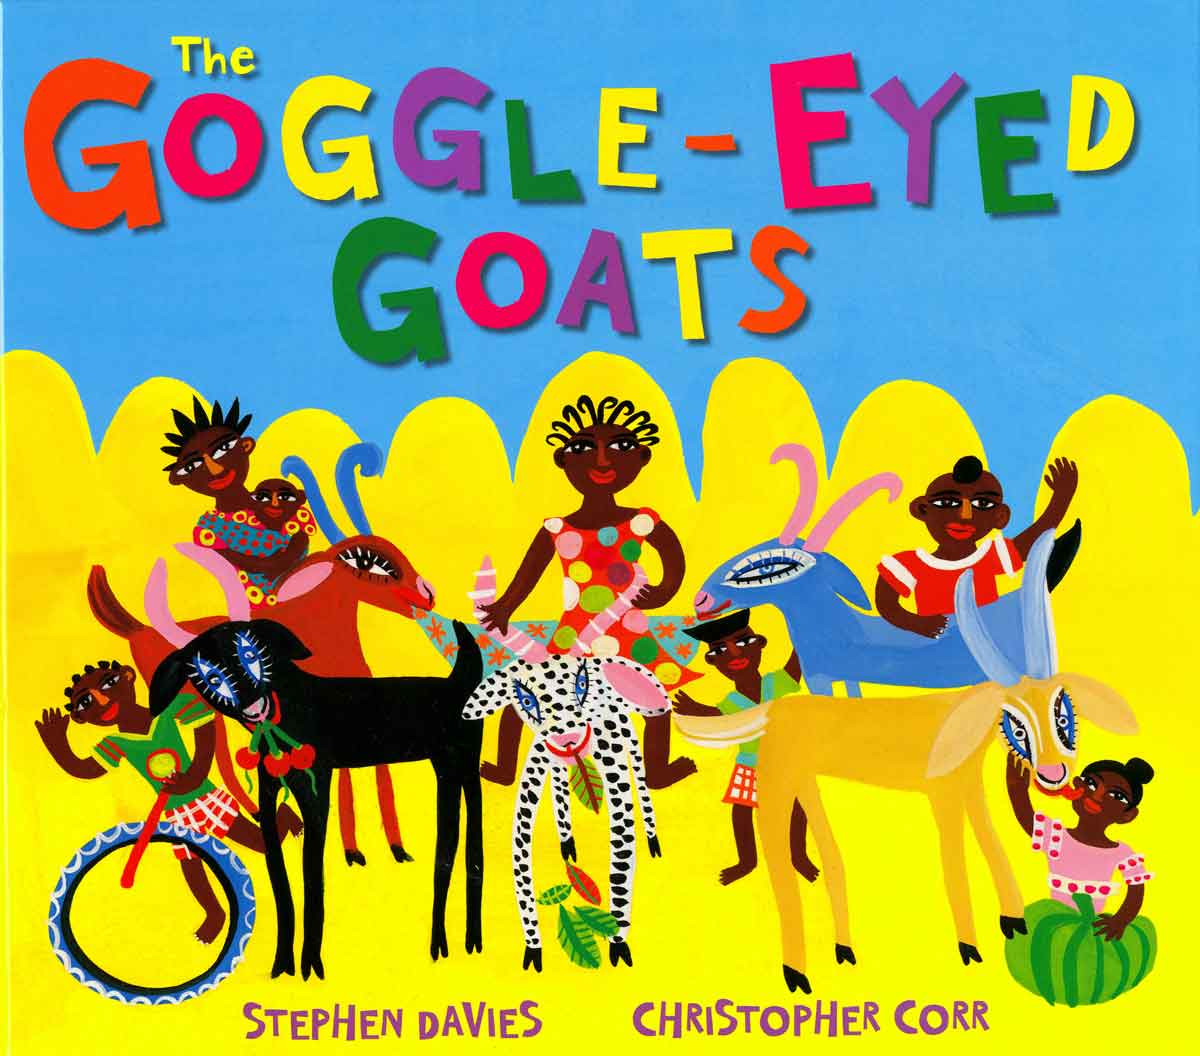 Book-Goats--front-cover